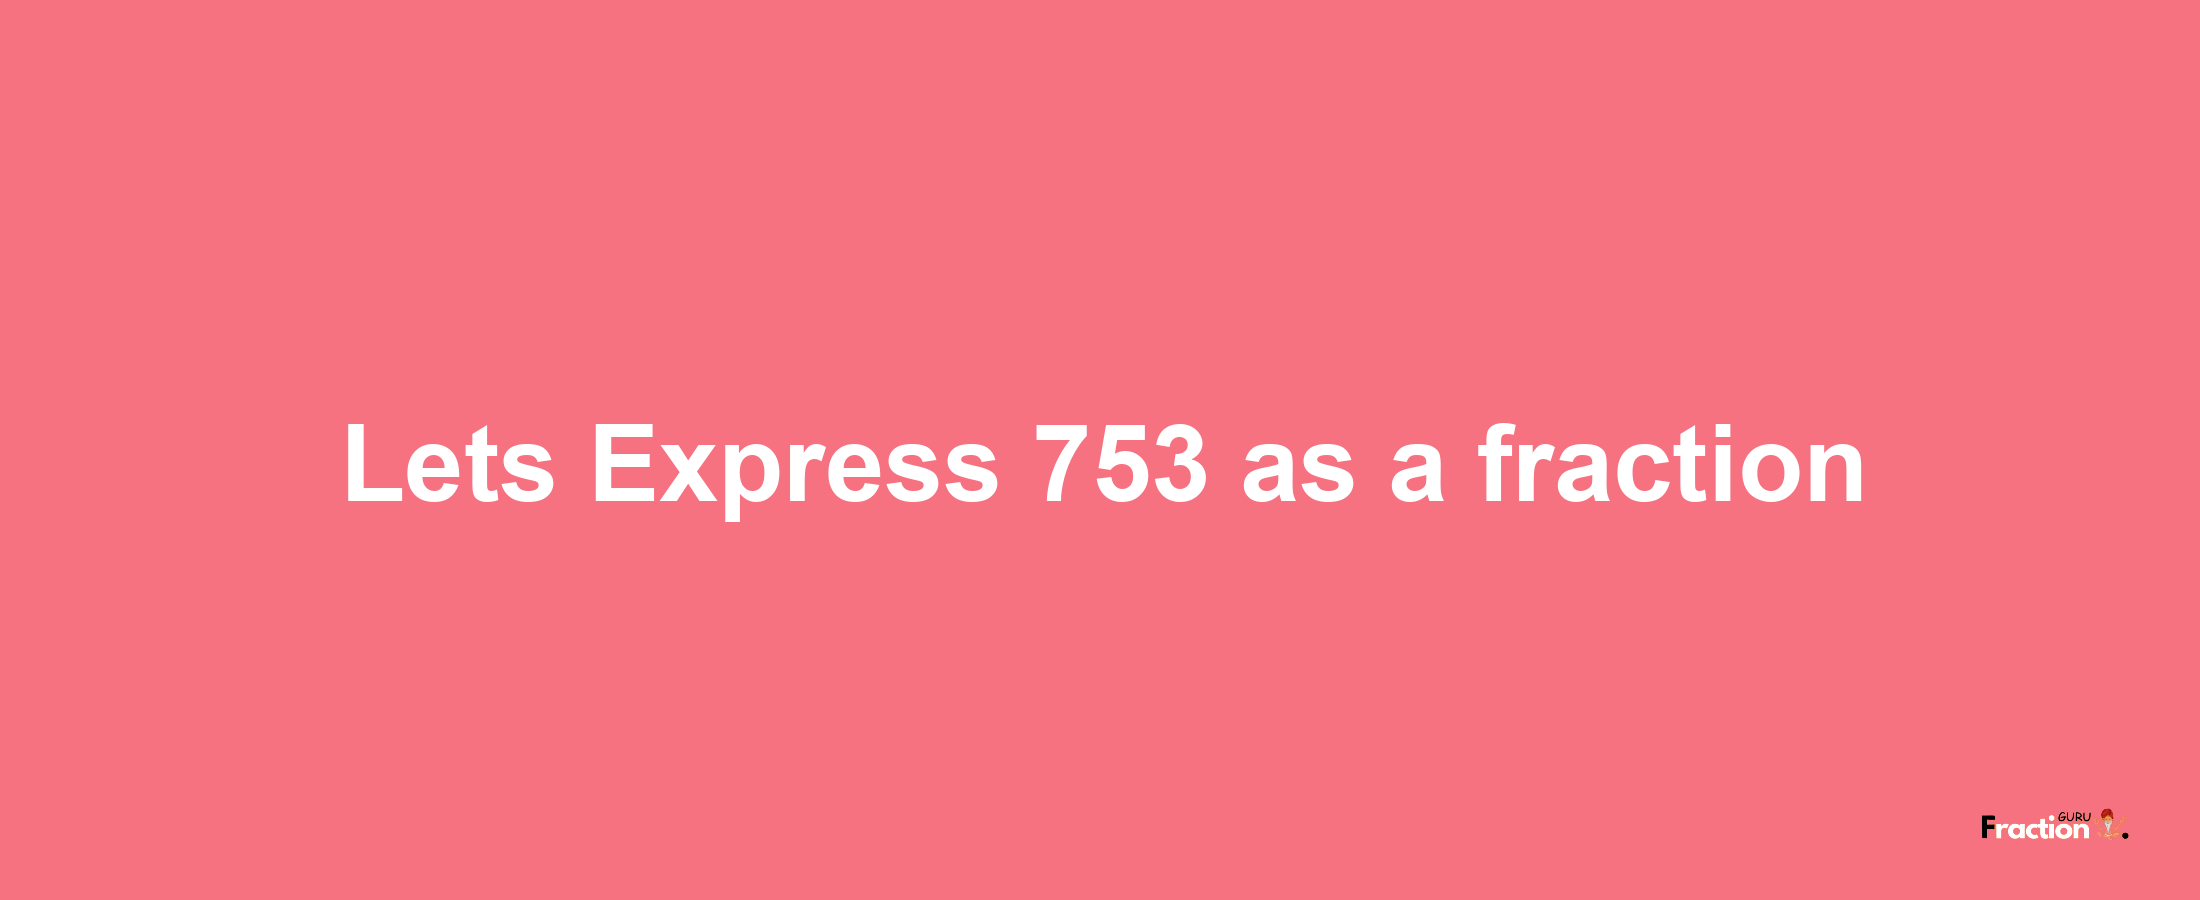 Lets Express 753 as afraction